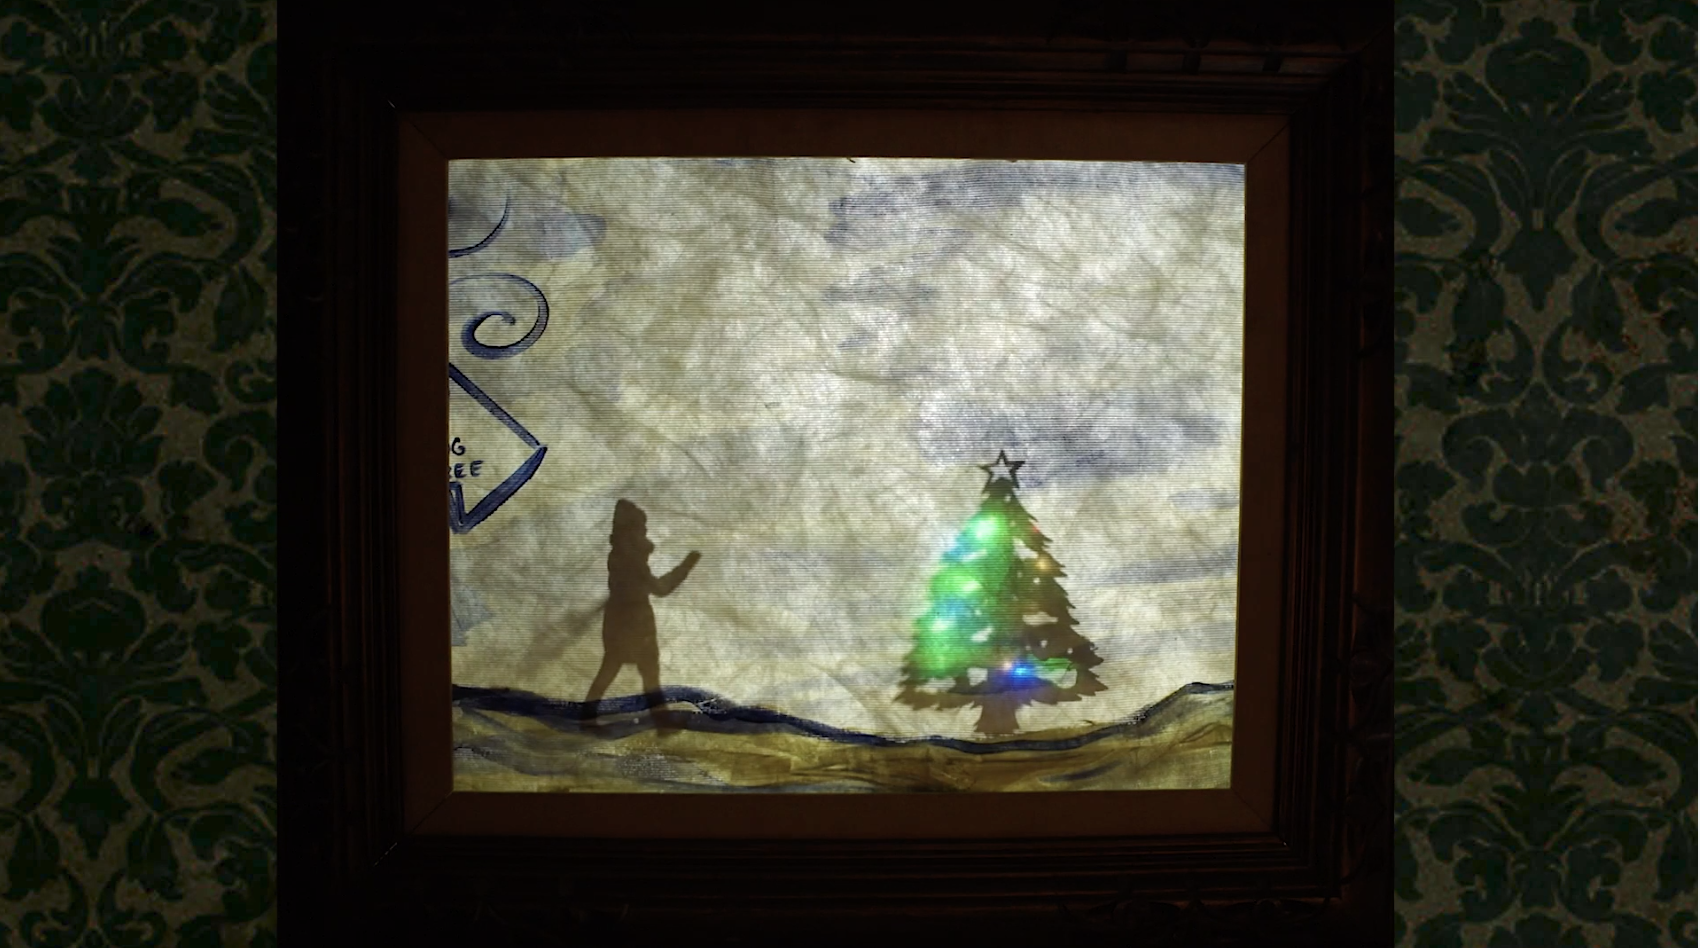 Shadow Puppet Show, Welcome to Meadowlark Falls: The Very Merry Christmas Contest